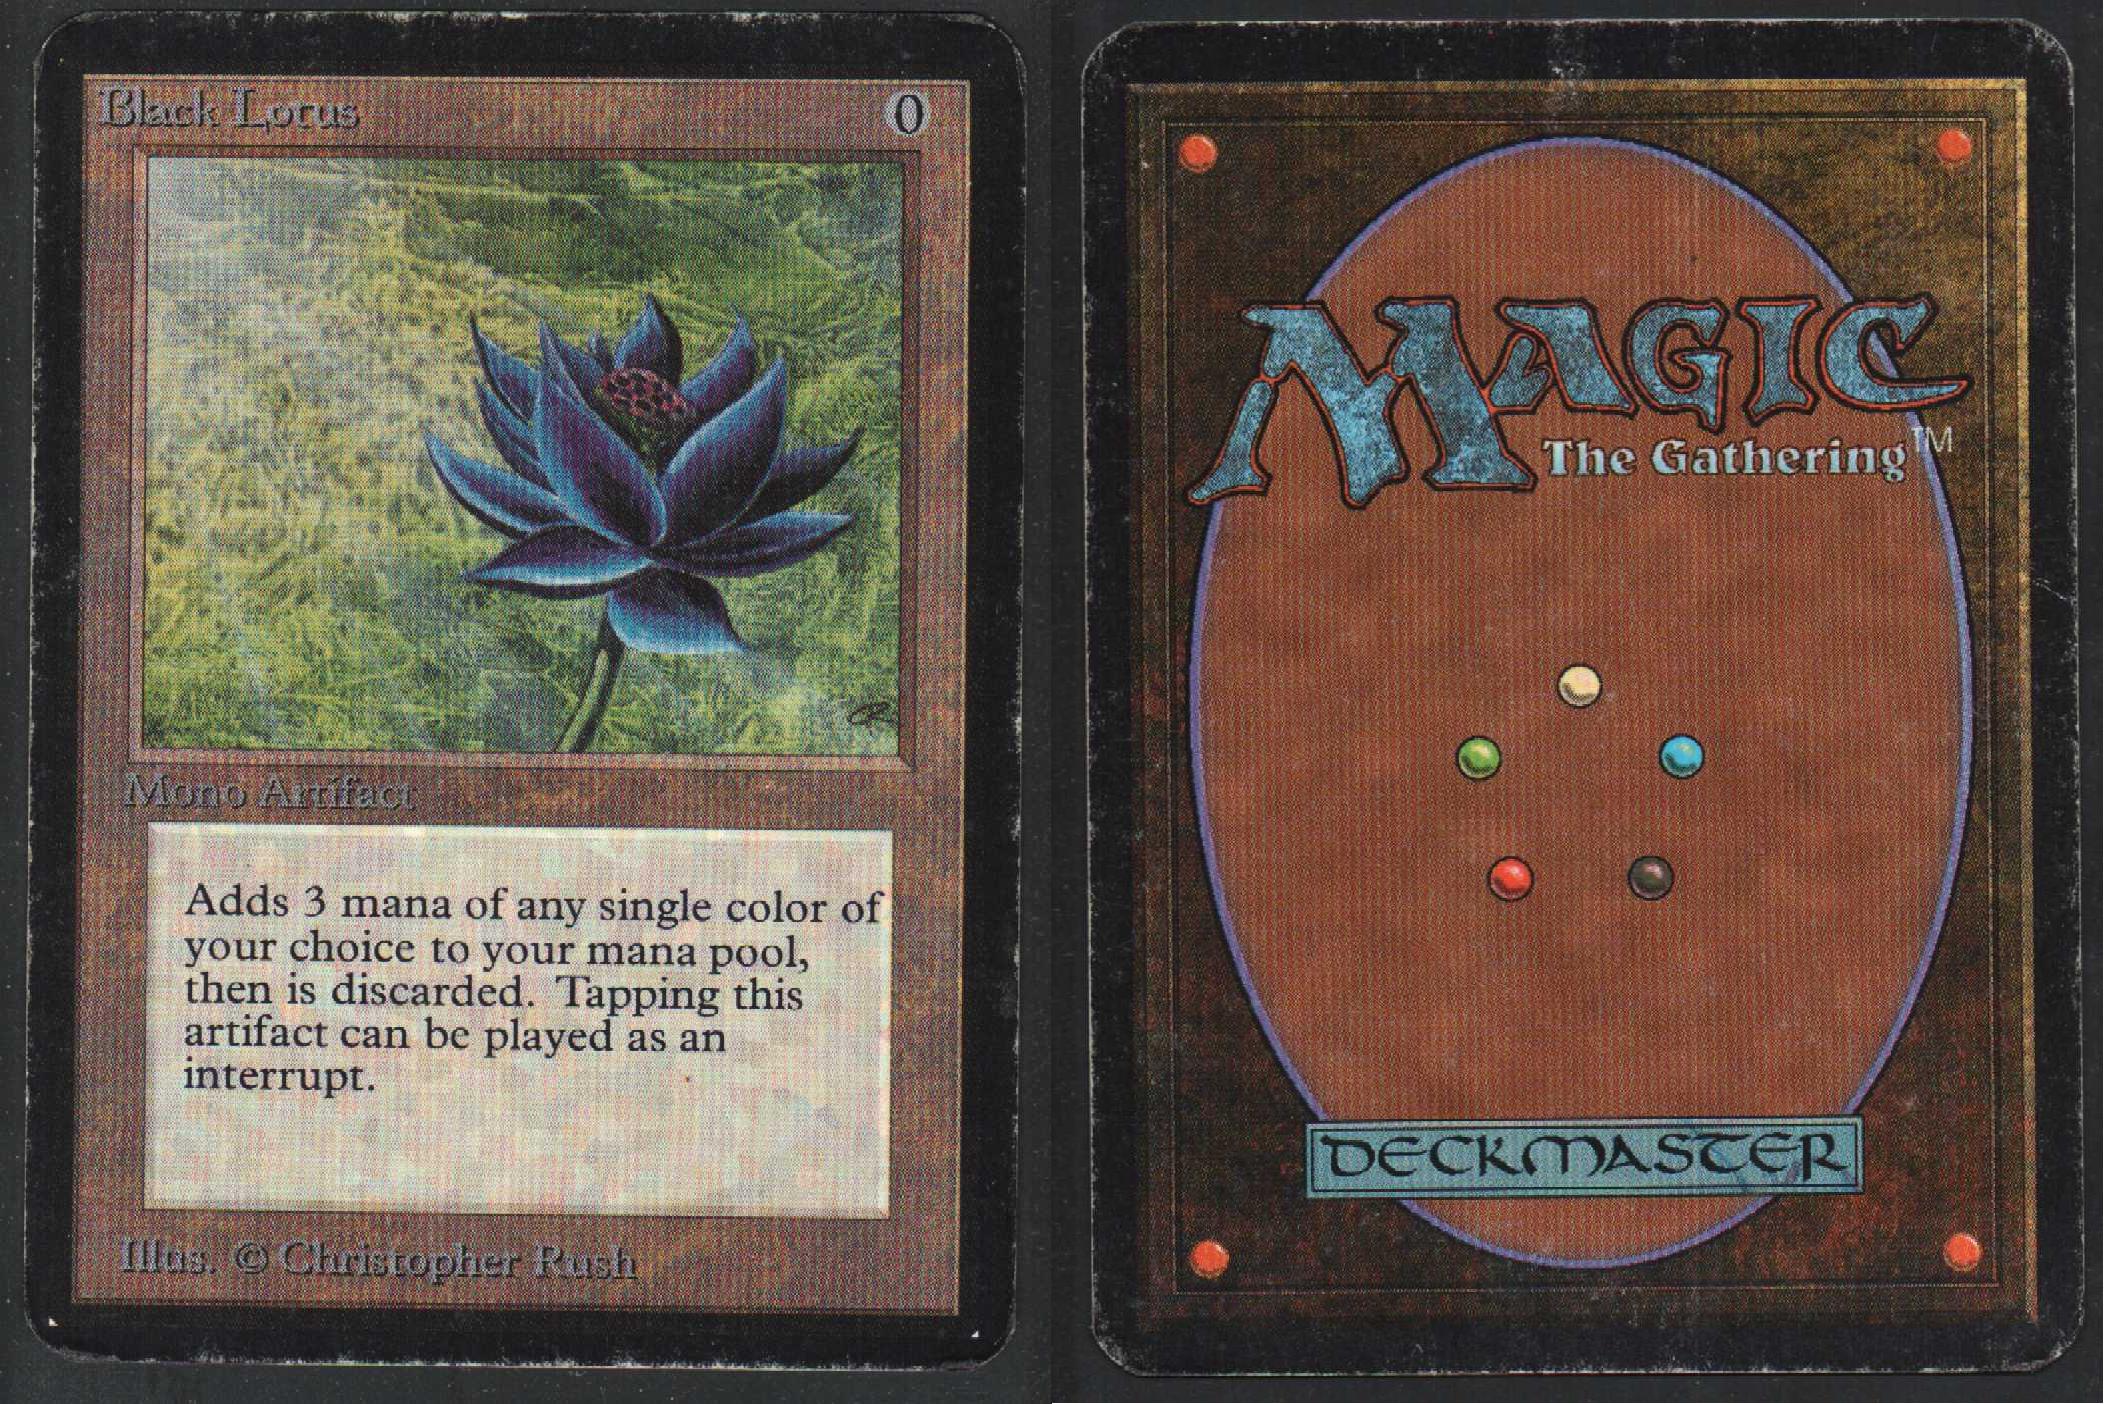 Most Expensive Trading Card (non-sports): 1993 Alpha Black Lotus (Magic: The Gathering).
Price: $27,302.